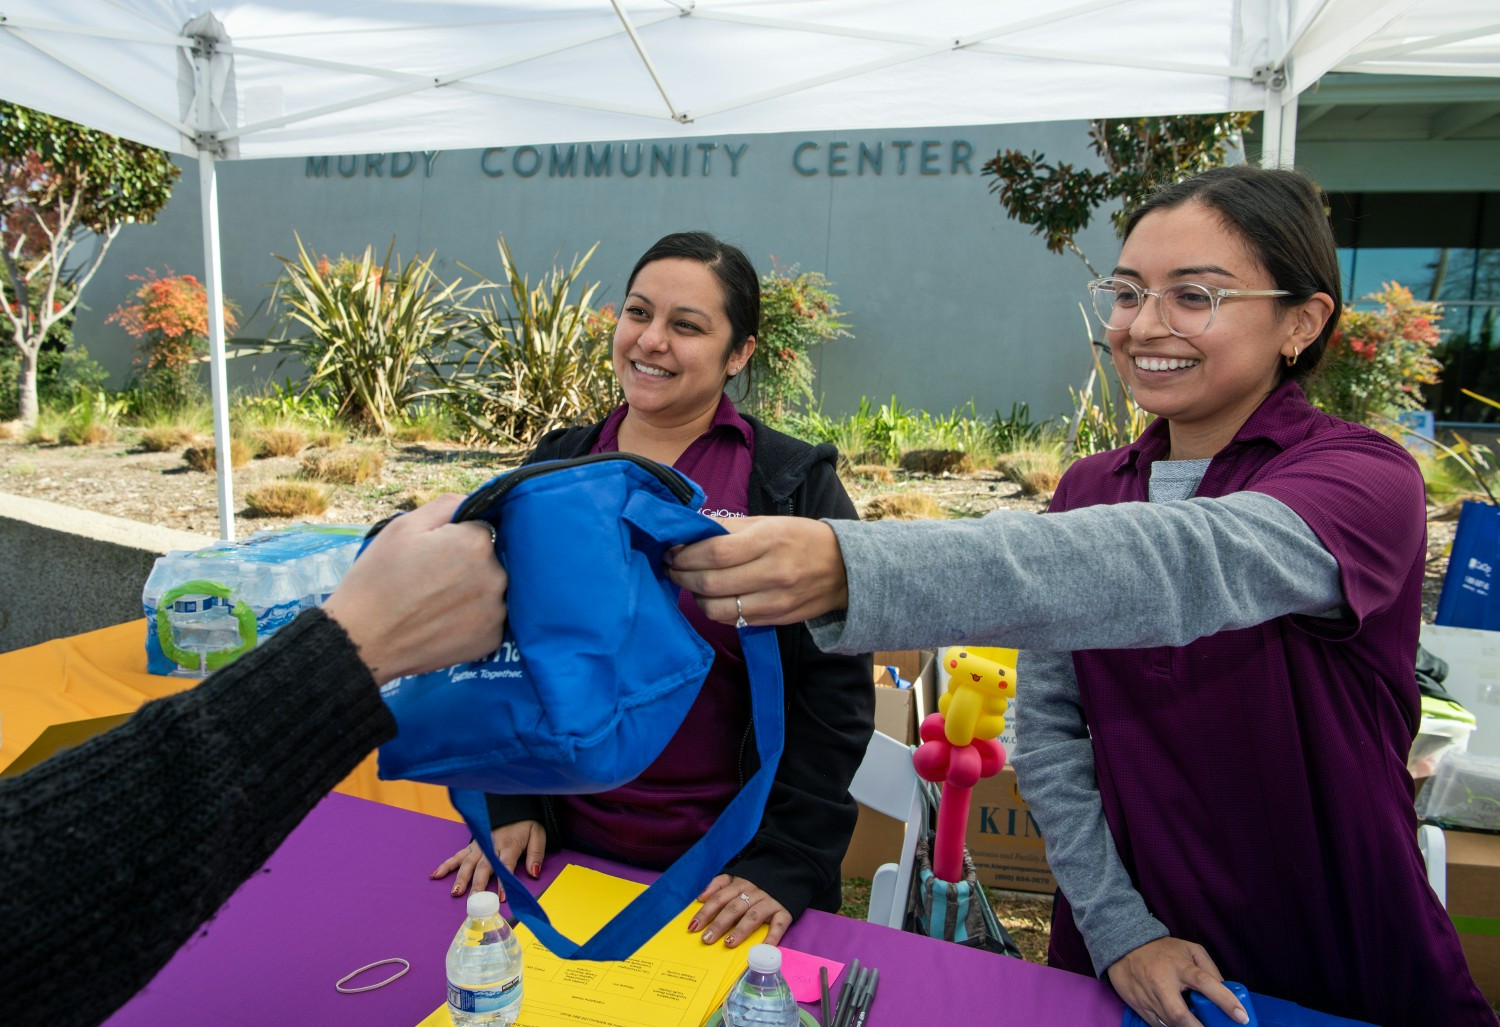 CalOptima Health employees work at community events to ensure members have easy access to resources.